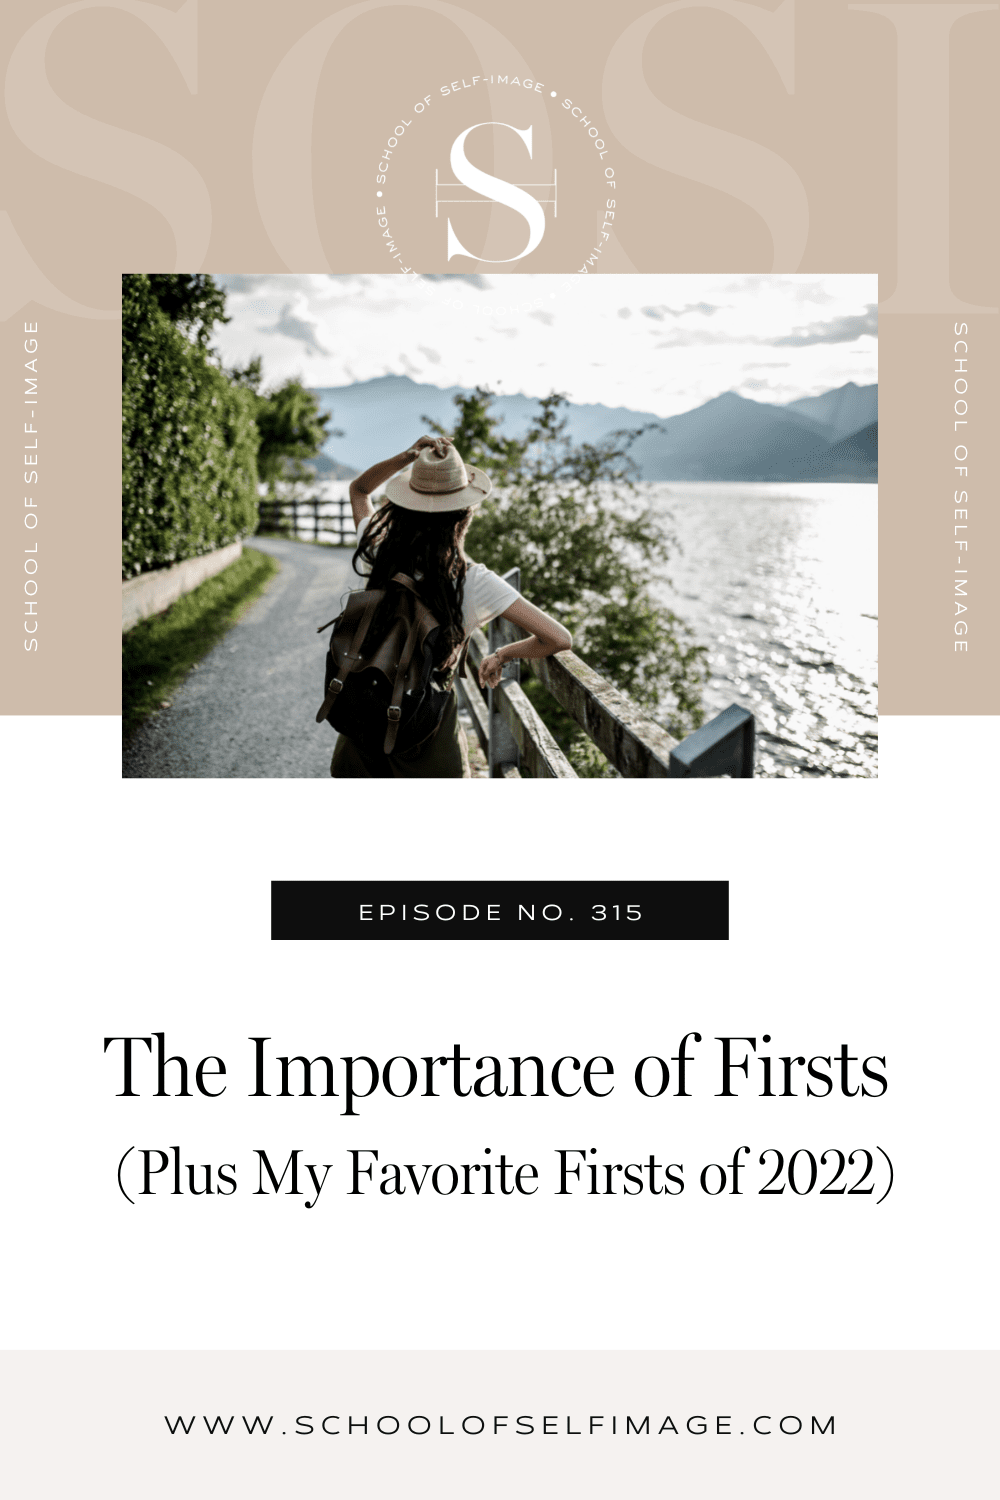 The Importance of Firsts (Plus my favorite firsts of 2022)